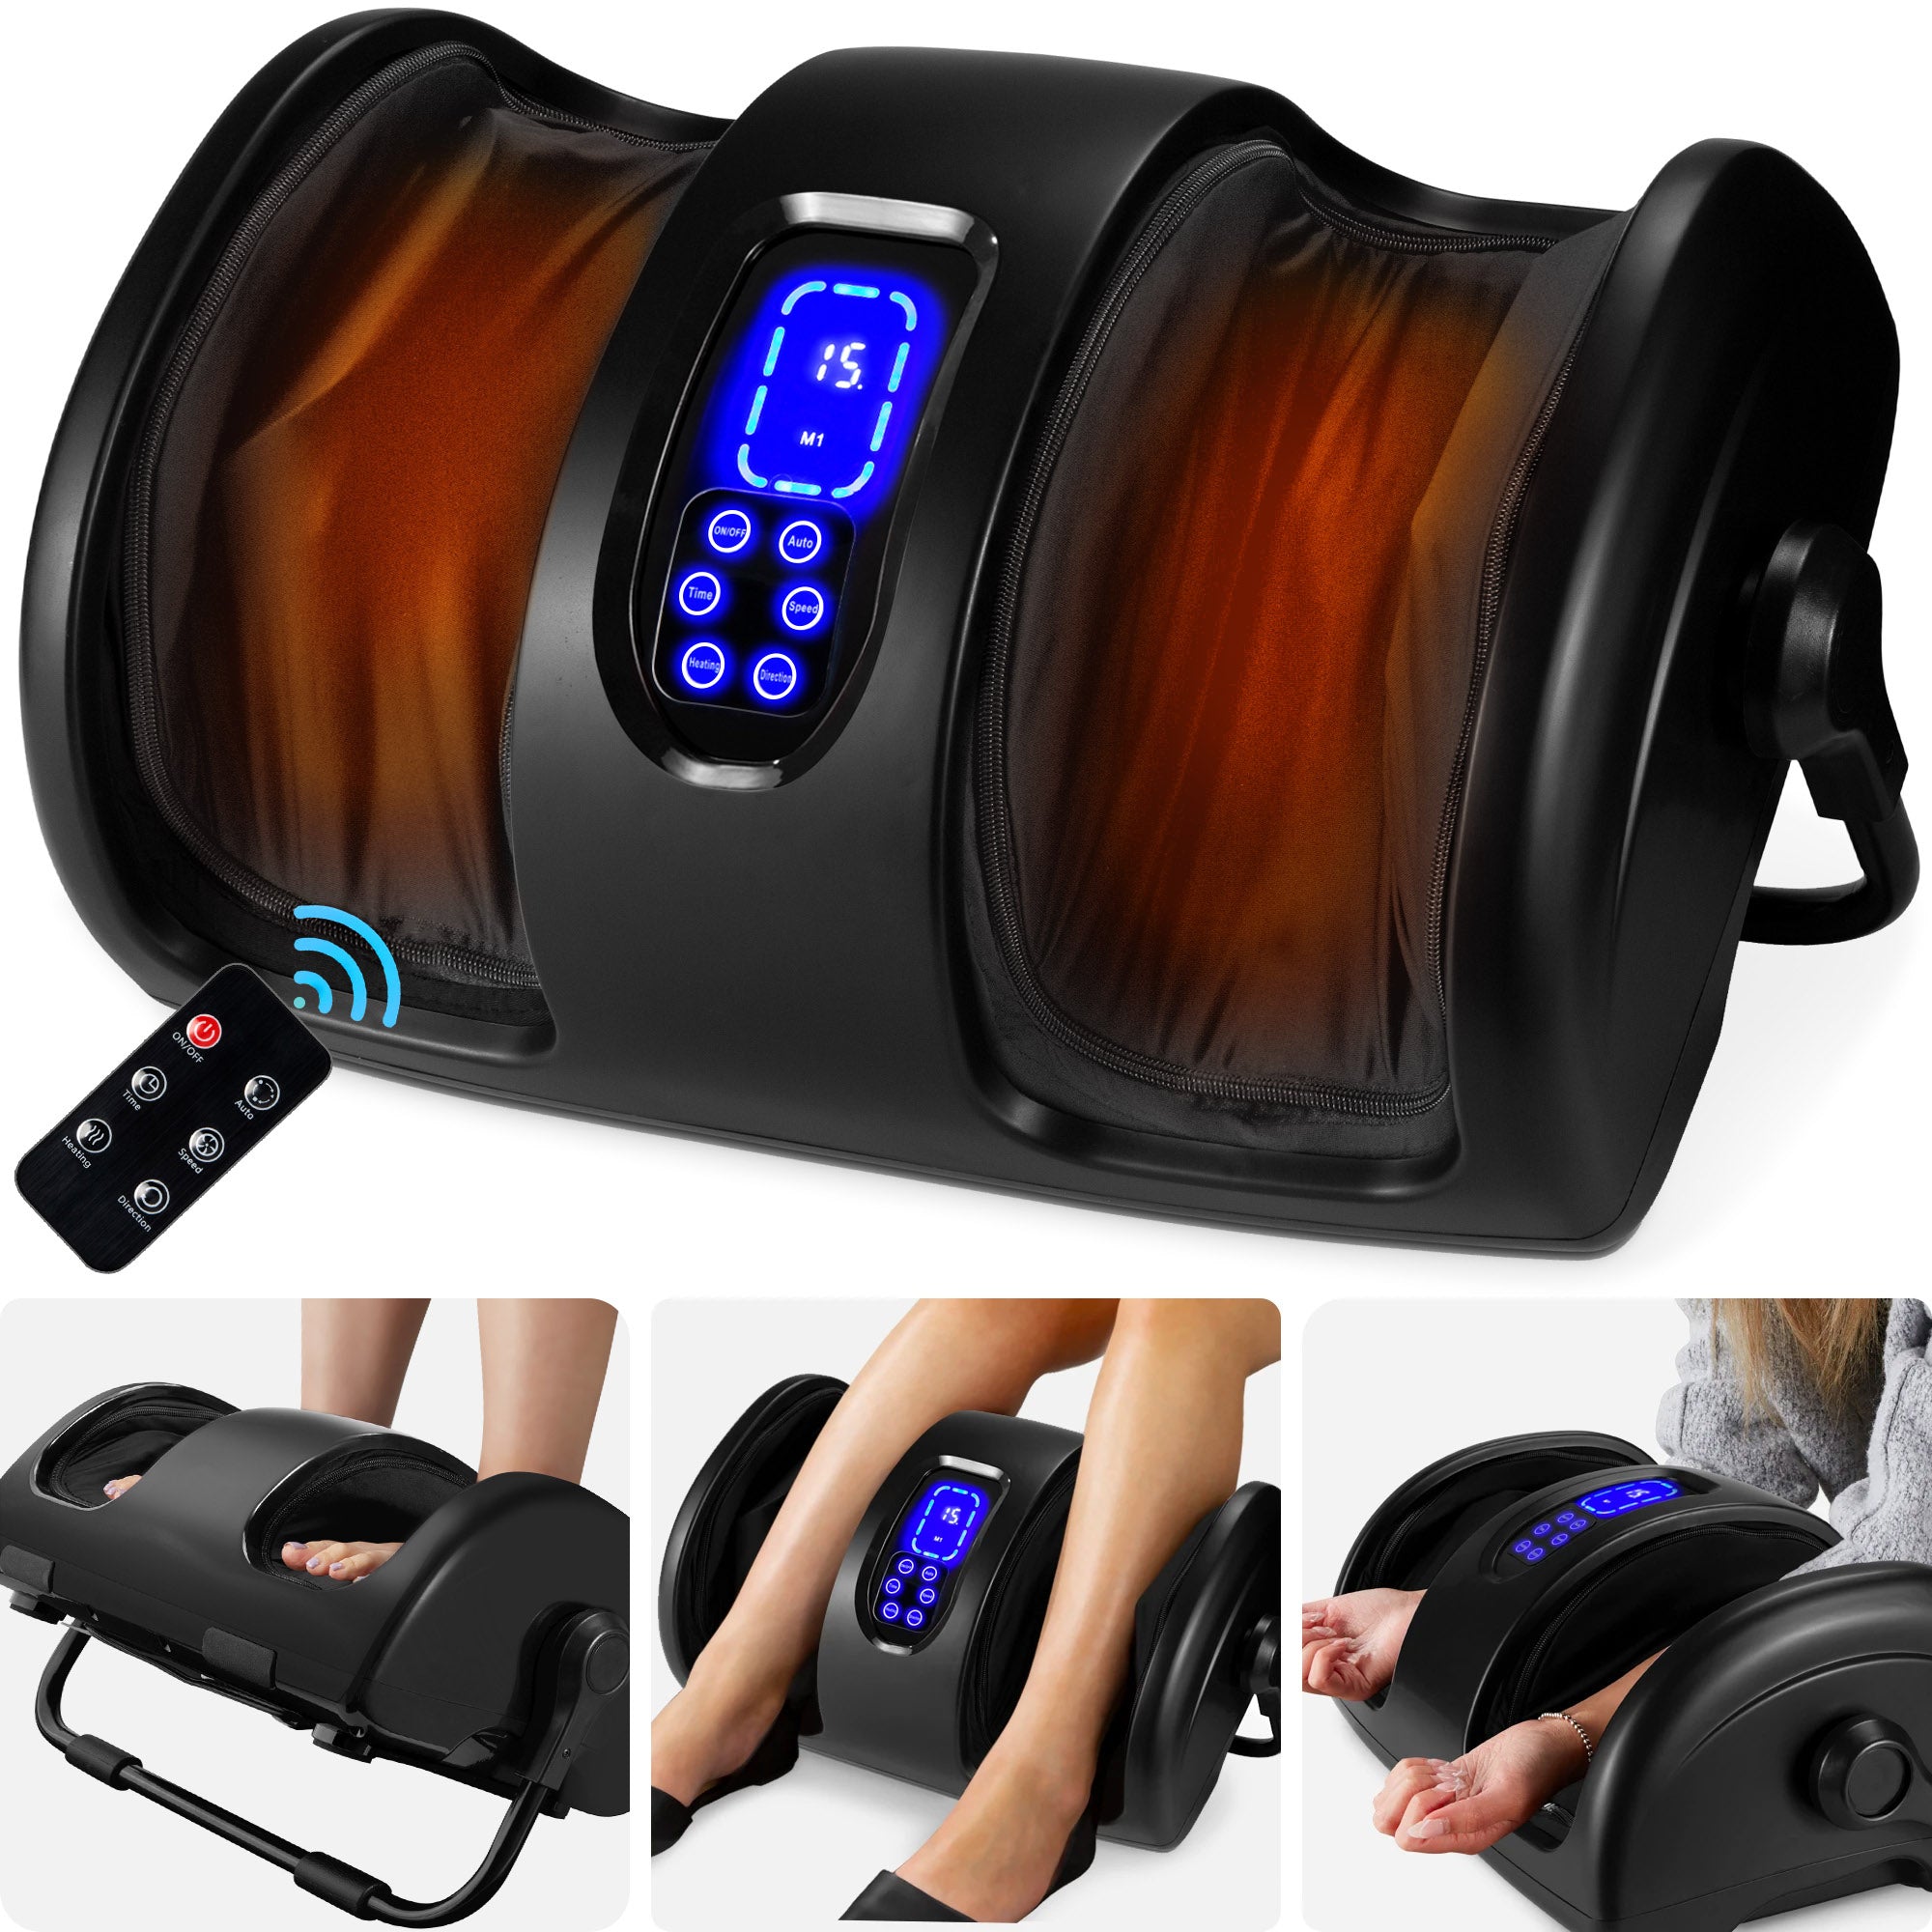 Benefits of Shiatsu Foot Massager with Heat and Air